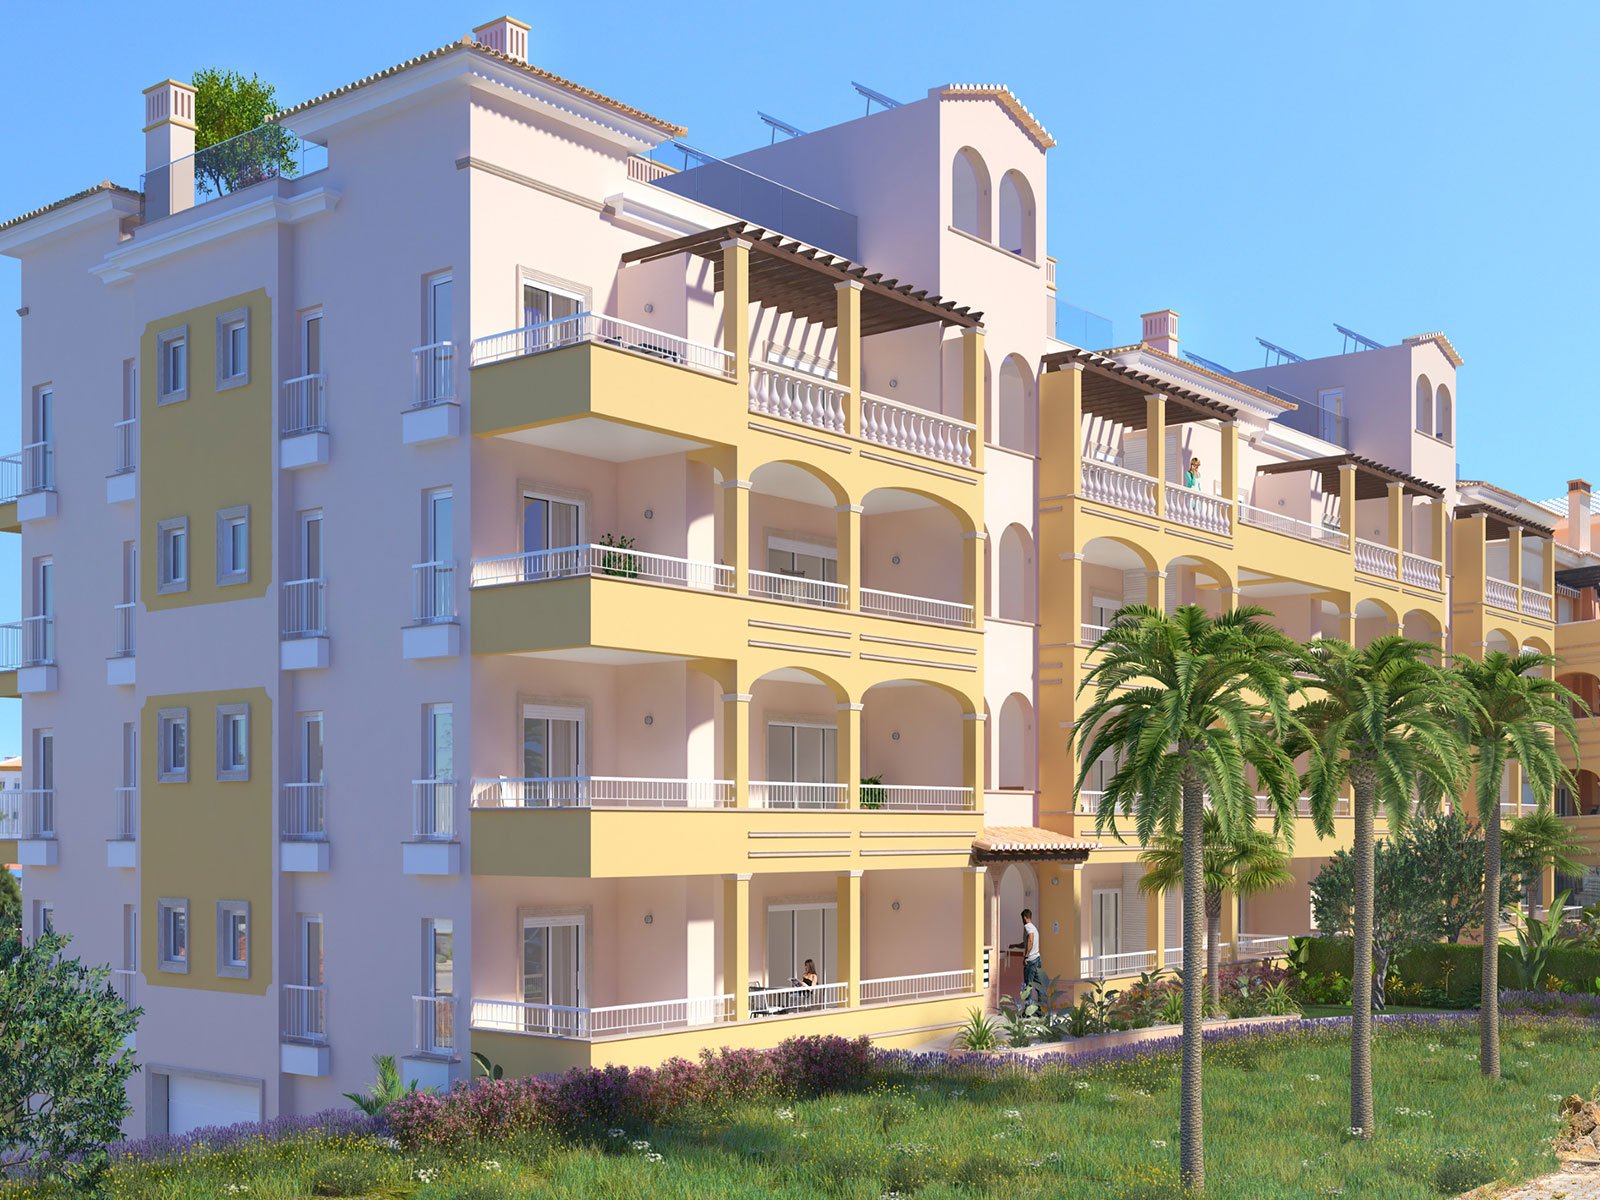 2 bedroom apartment with balcony in a new development in Lagos 3522720809